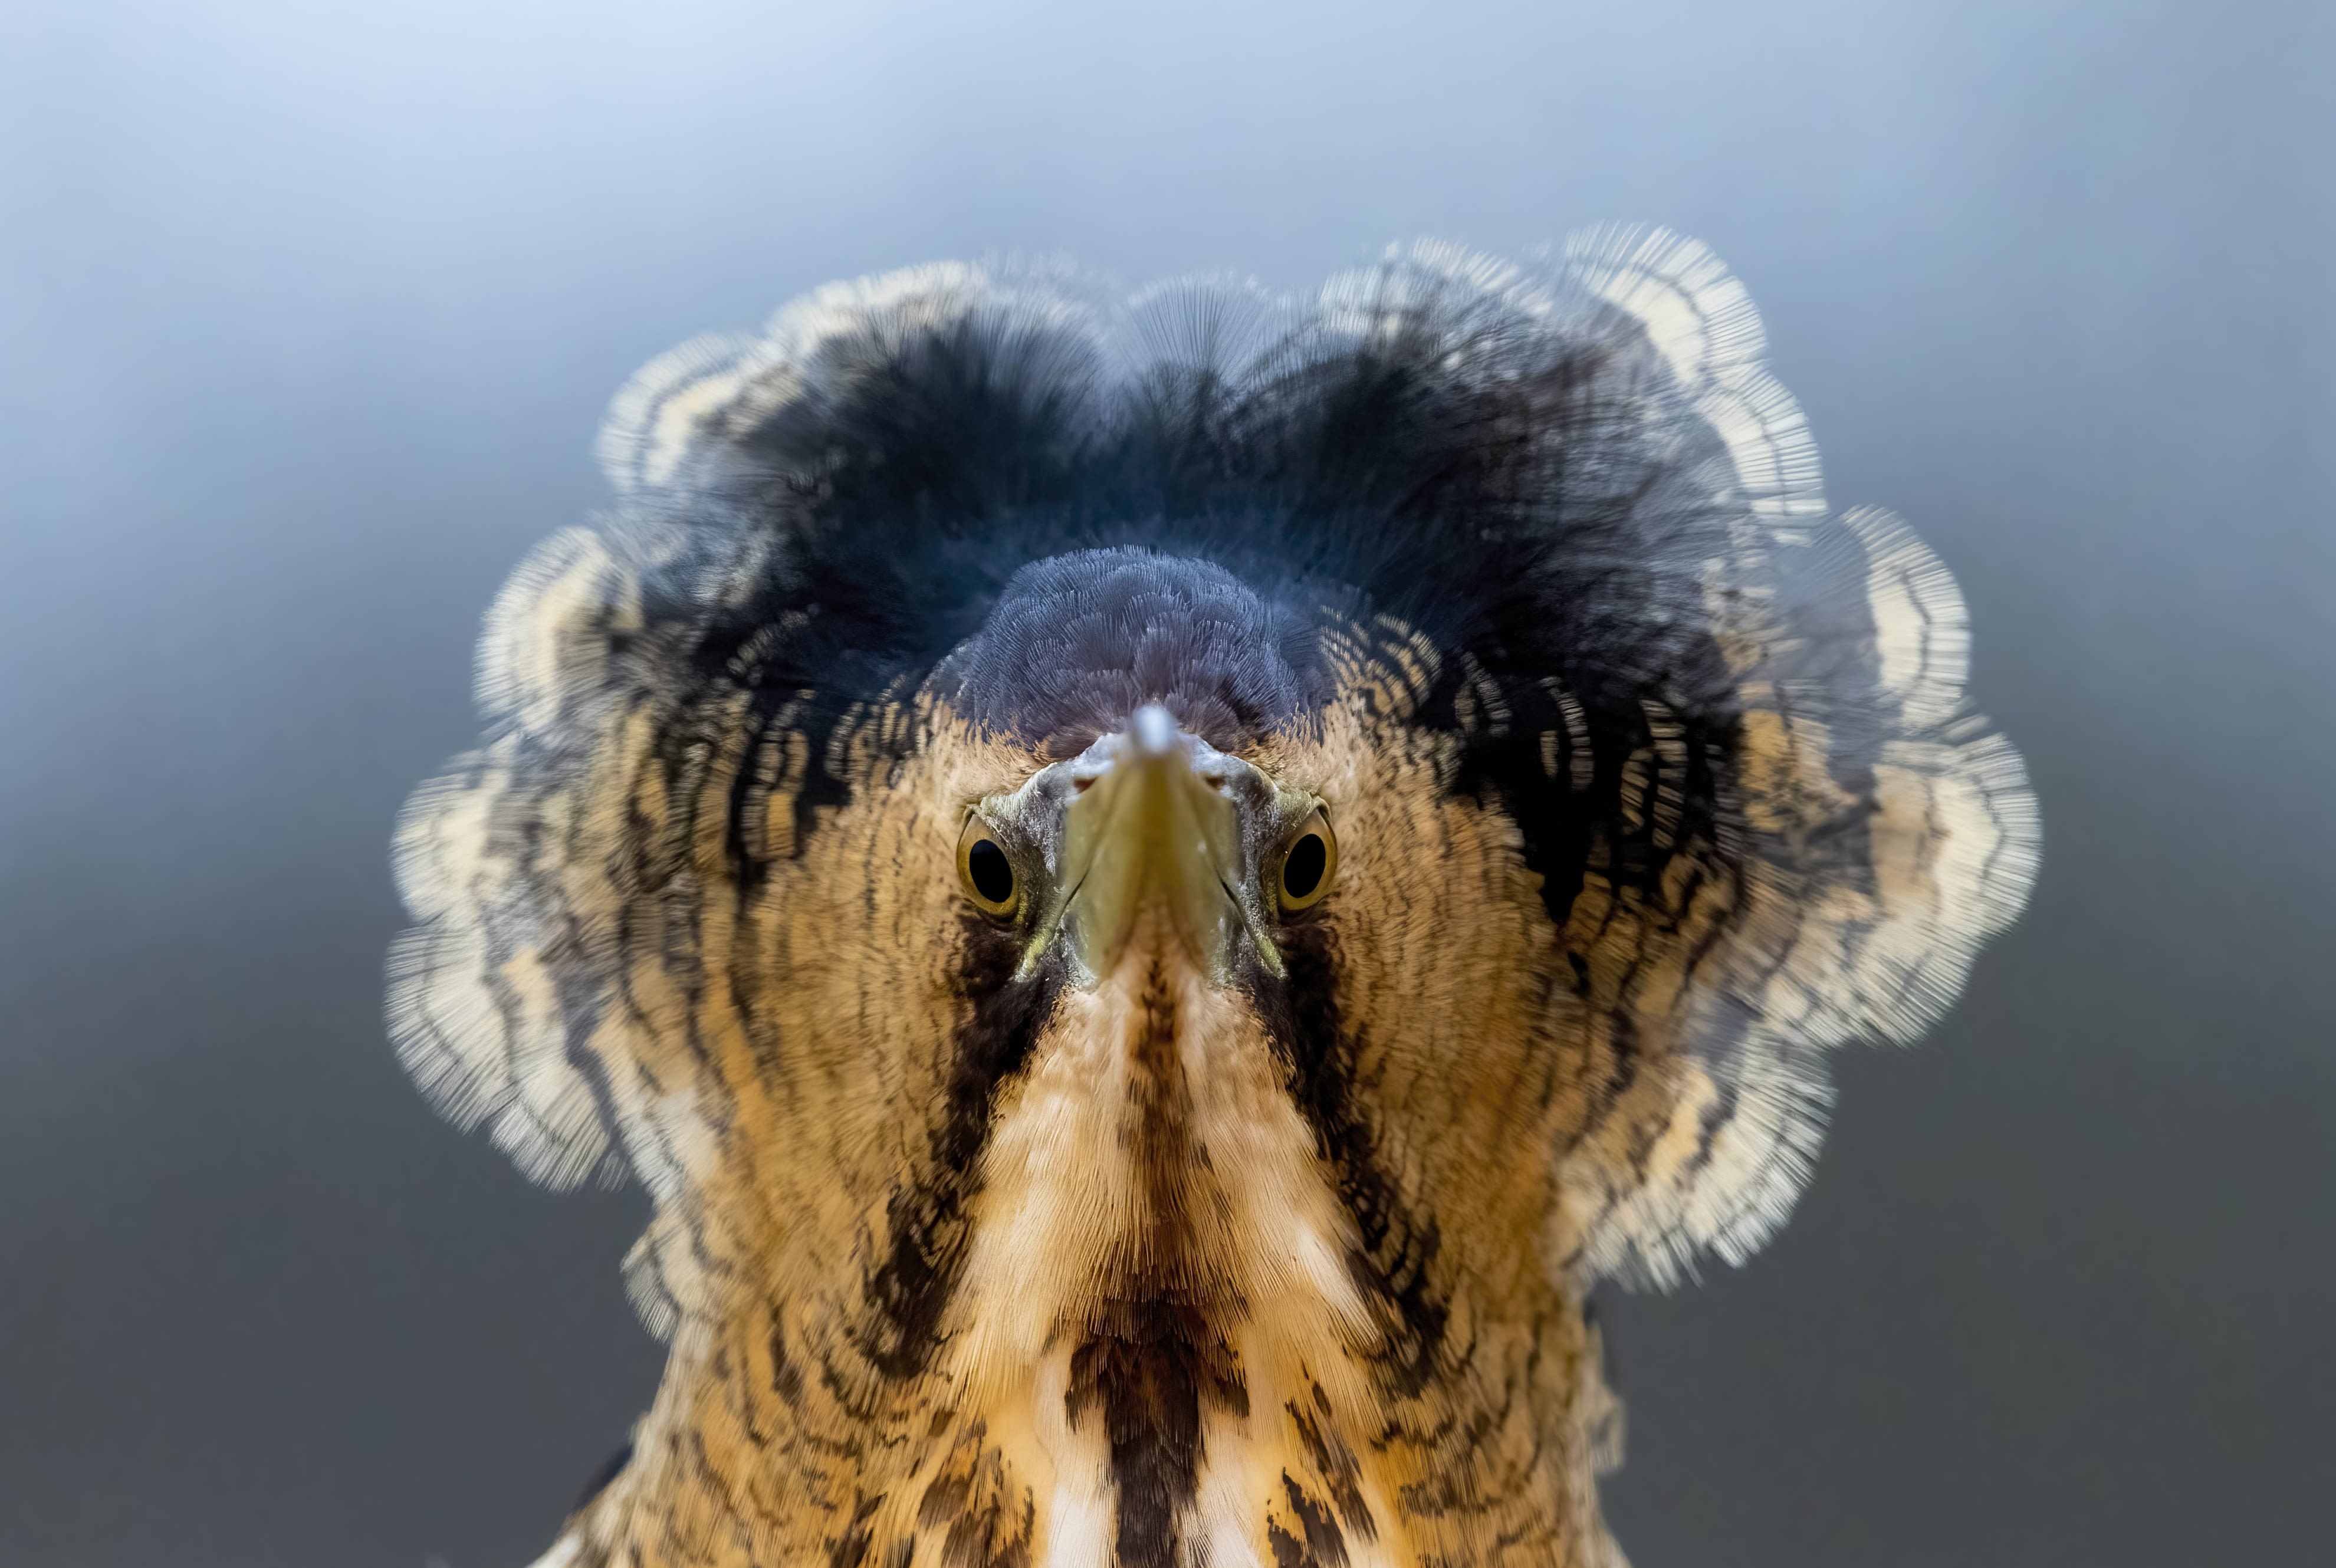 Striking image of a bitter staring straight down the camera lens, with puffed out feathers circling its head dramatically.